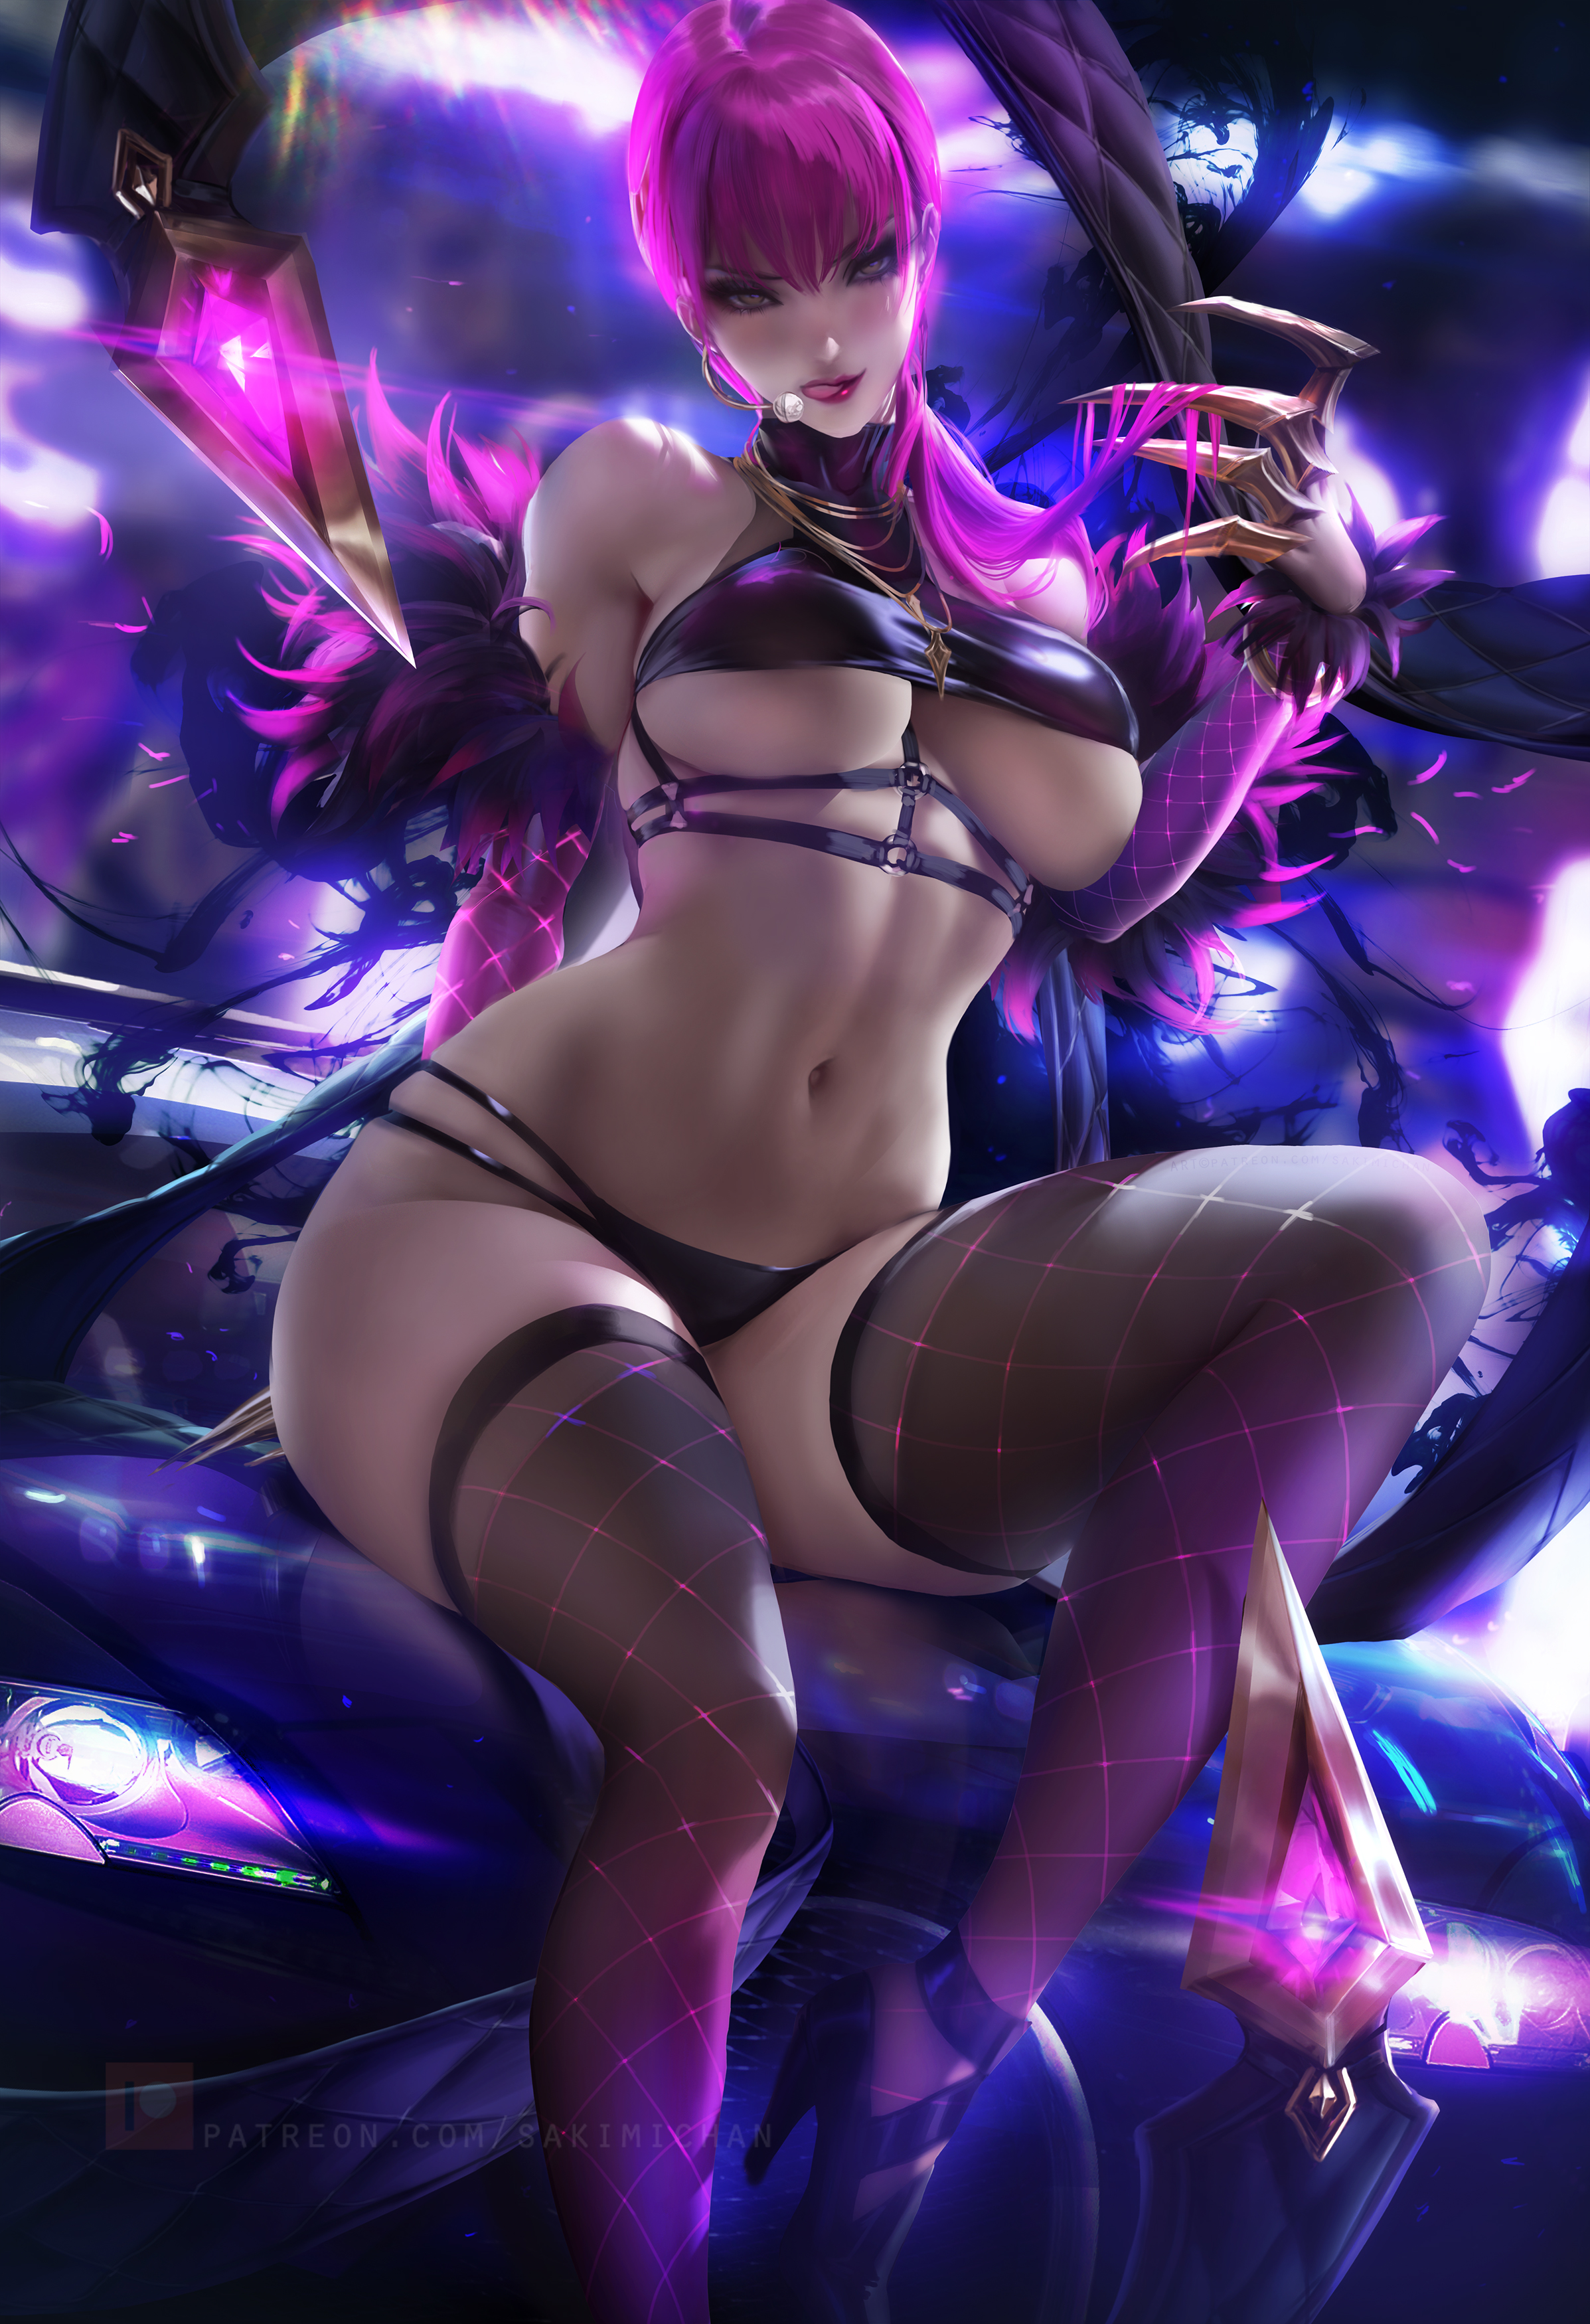 General 2395x3500 Evelynn (League of Legends) League of Legends K/DA video games video game characters video game girls portrait display purple hair bangs glowing underwear bra underboob panties belly necklace thick thigh stockings black stockings high heels car women with cars looking at viewer sensual gaze artwork drawing digital art illustration fan art Sakimichan